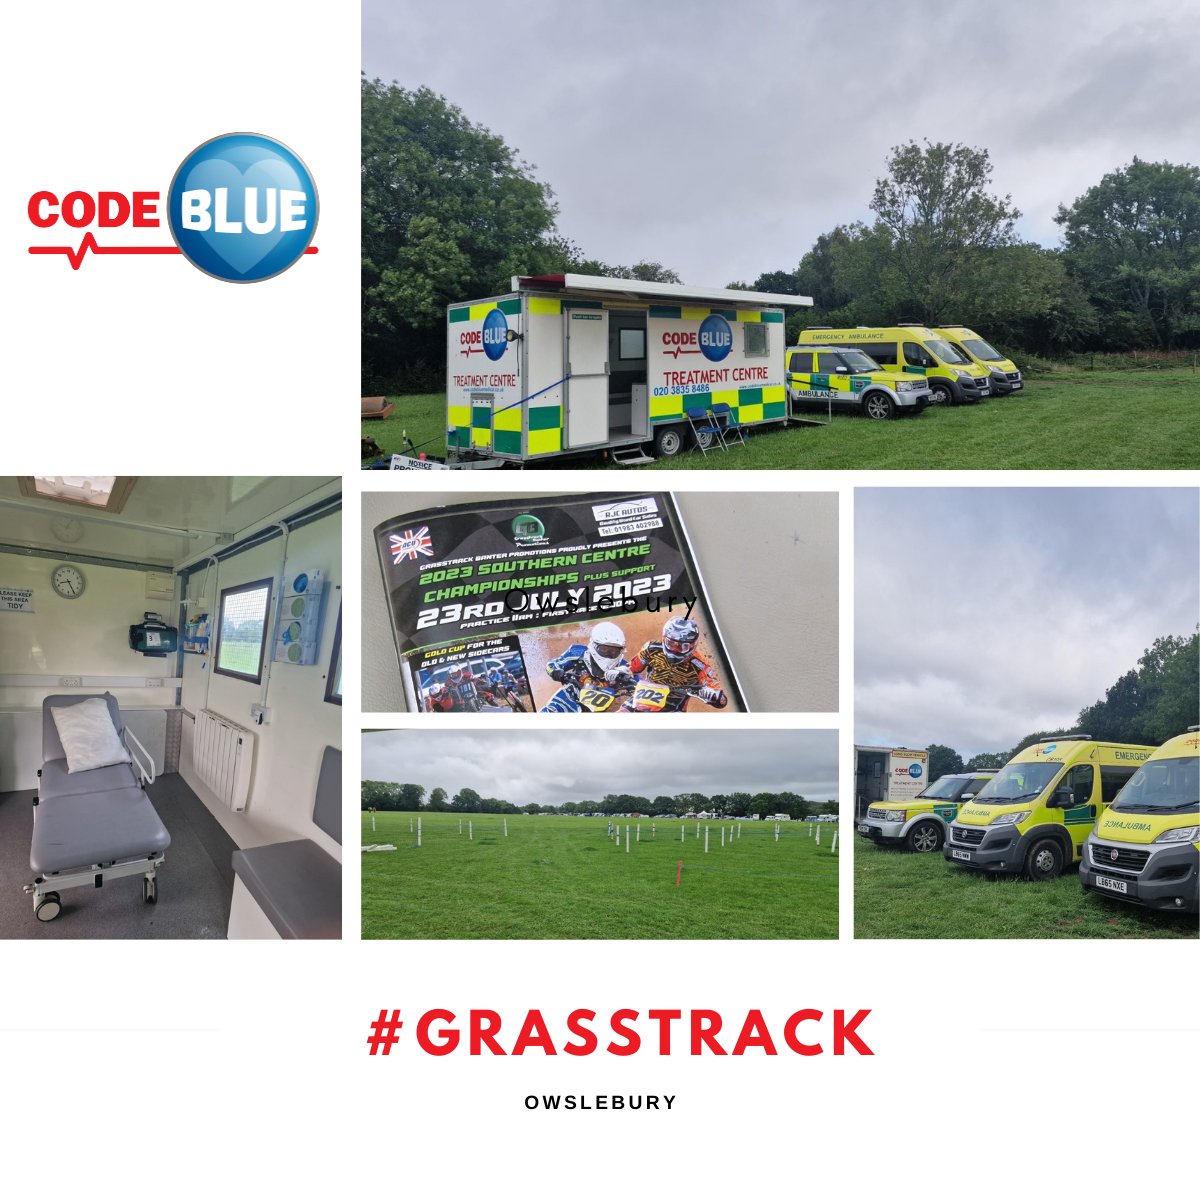 The CBUK Paramedic Led Team was6 on site for a phenomenal day of racing at Southern Centre Grasstrack Championships in Owslebury at the weekend.  Incredible racing.

@GrasstrackBanter #ThereWhenYouNeedUs #ACU #Grasstrack #Ambulance #MedicalTeam #EventSpecialists